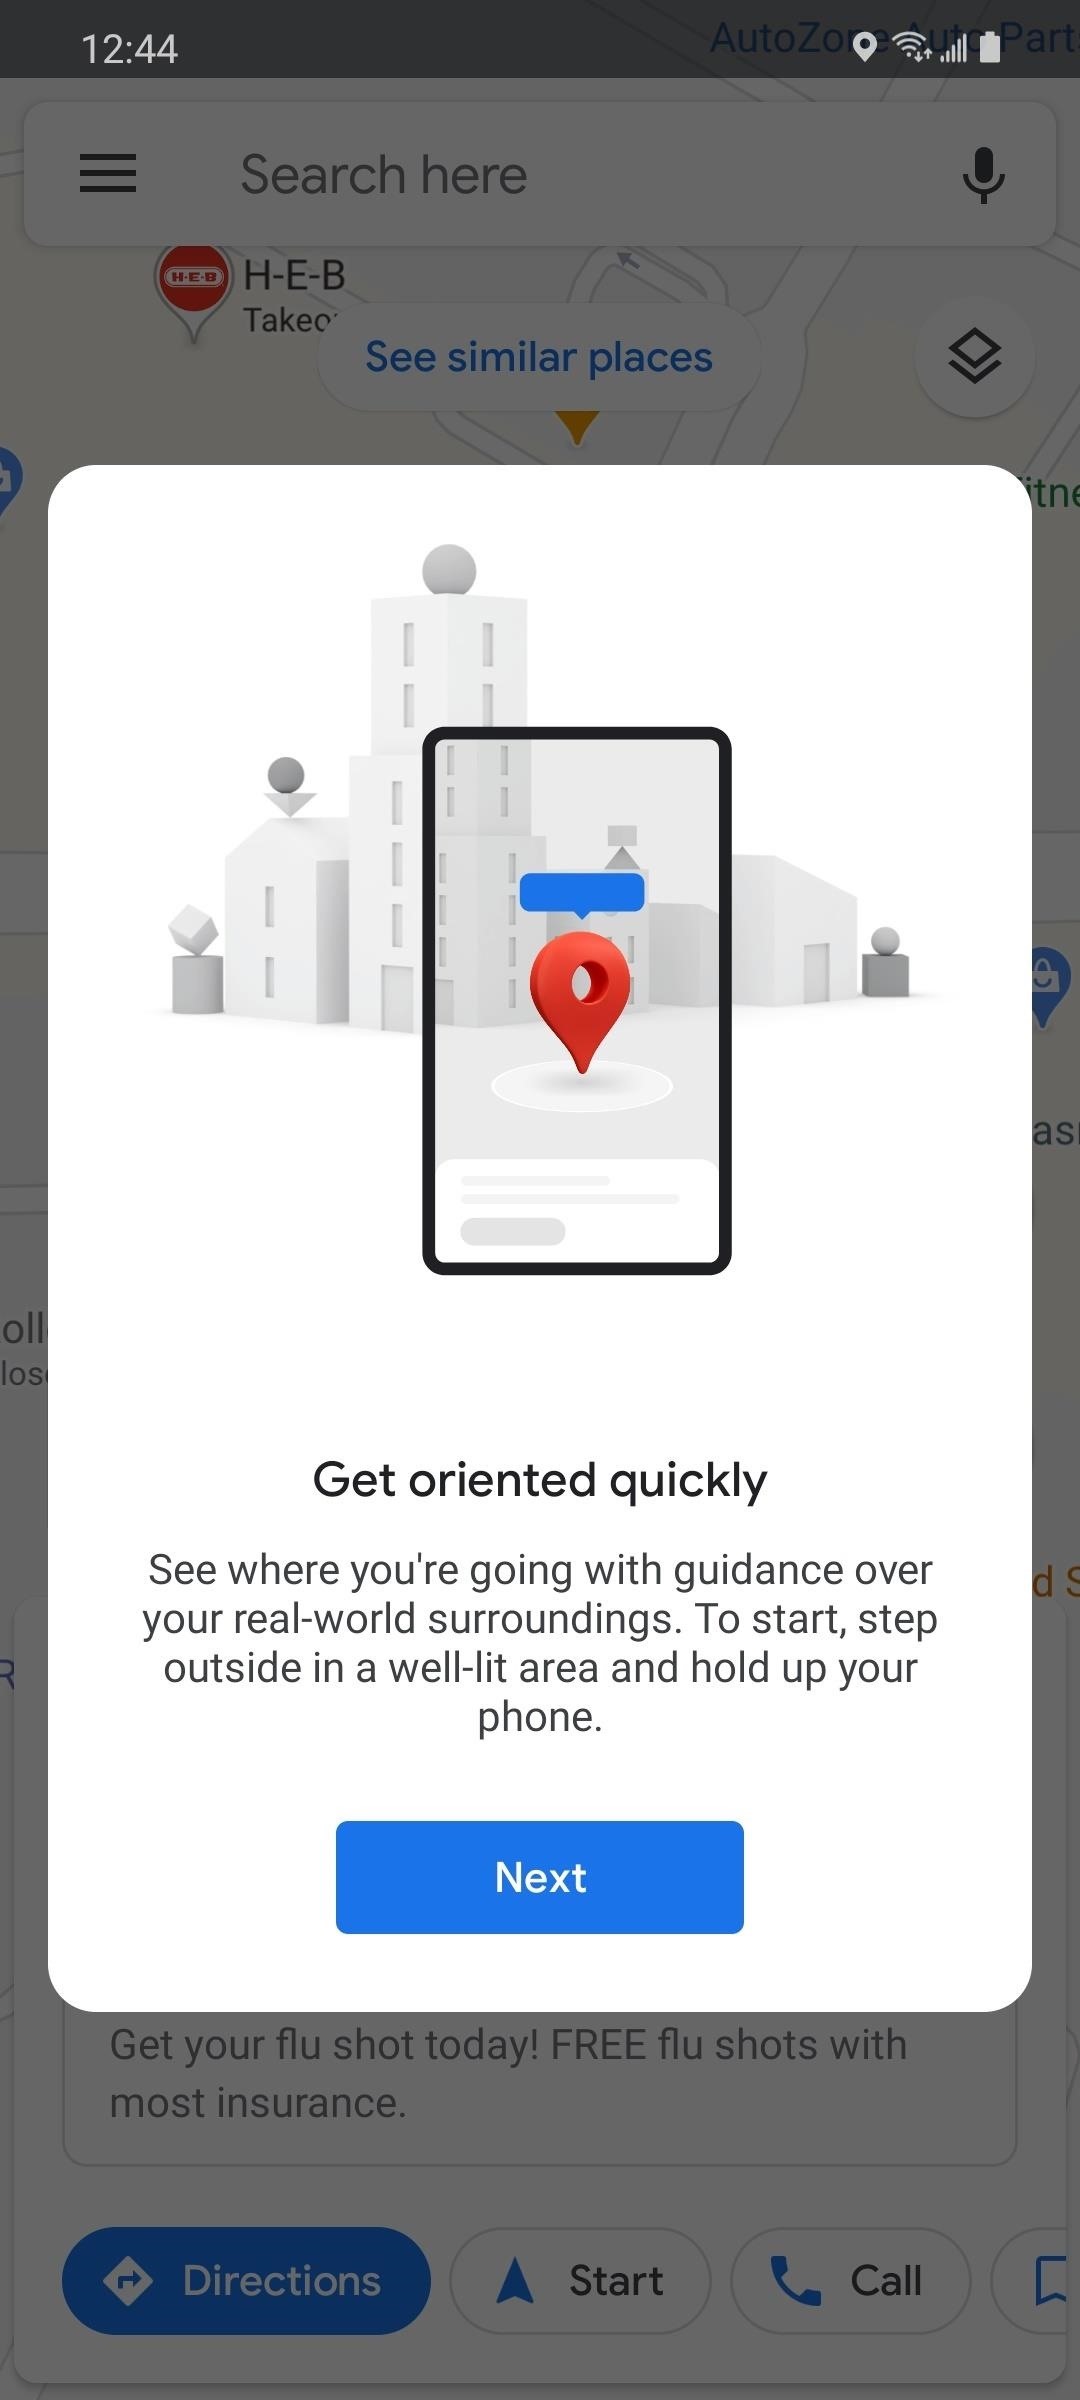 How to Use Your Phone's Camera as an Augmented Reality Viewfinder to Find Places in Google Maps